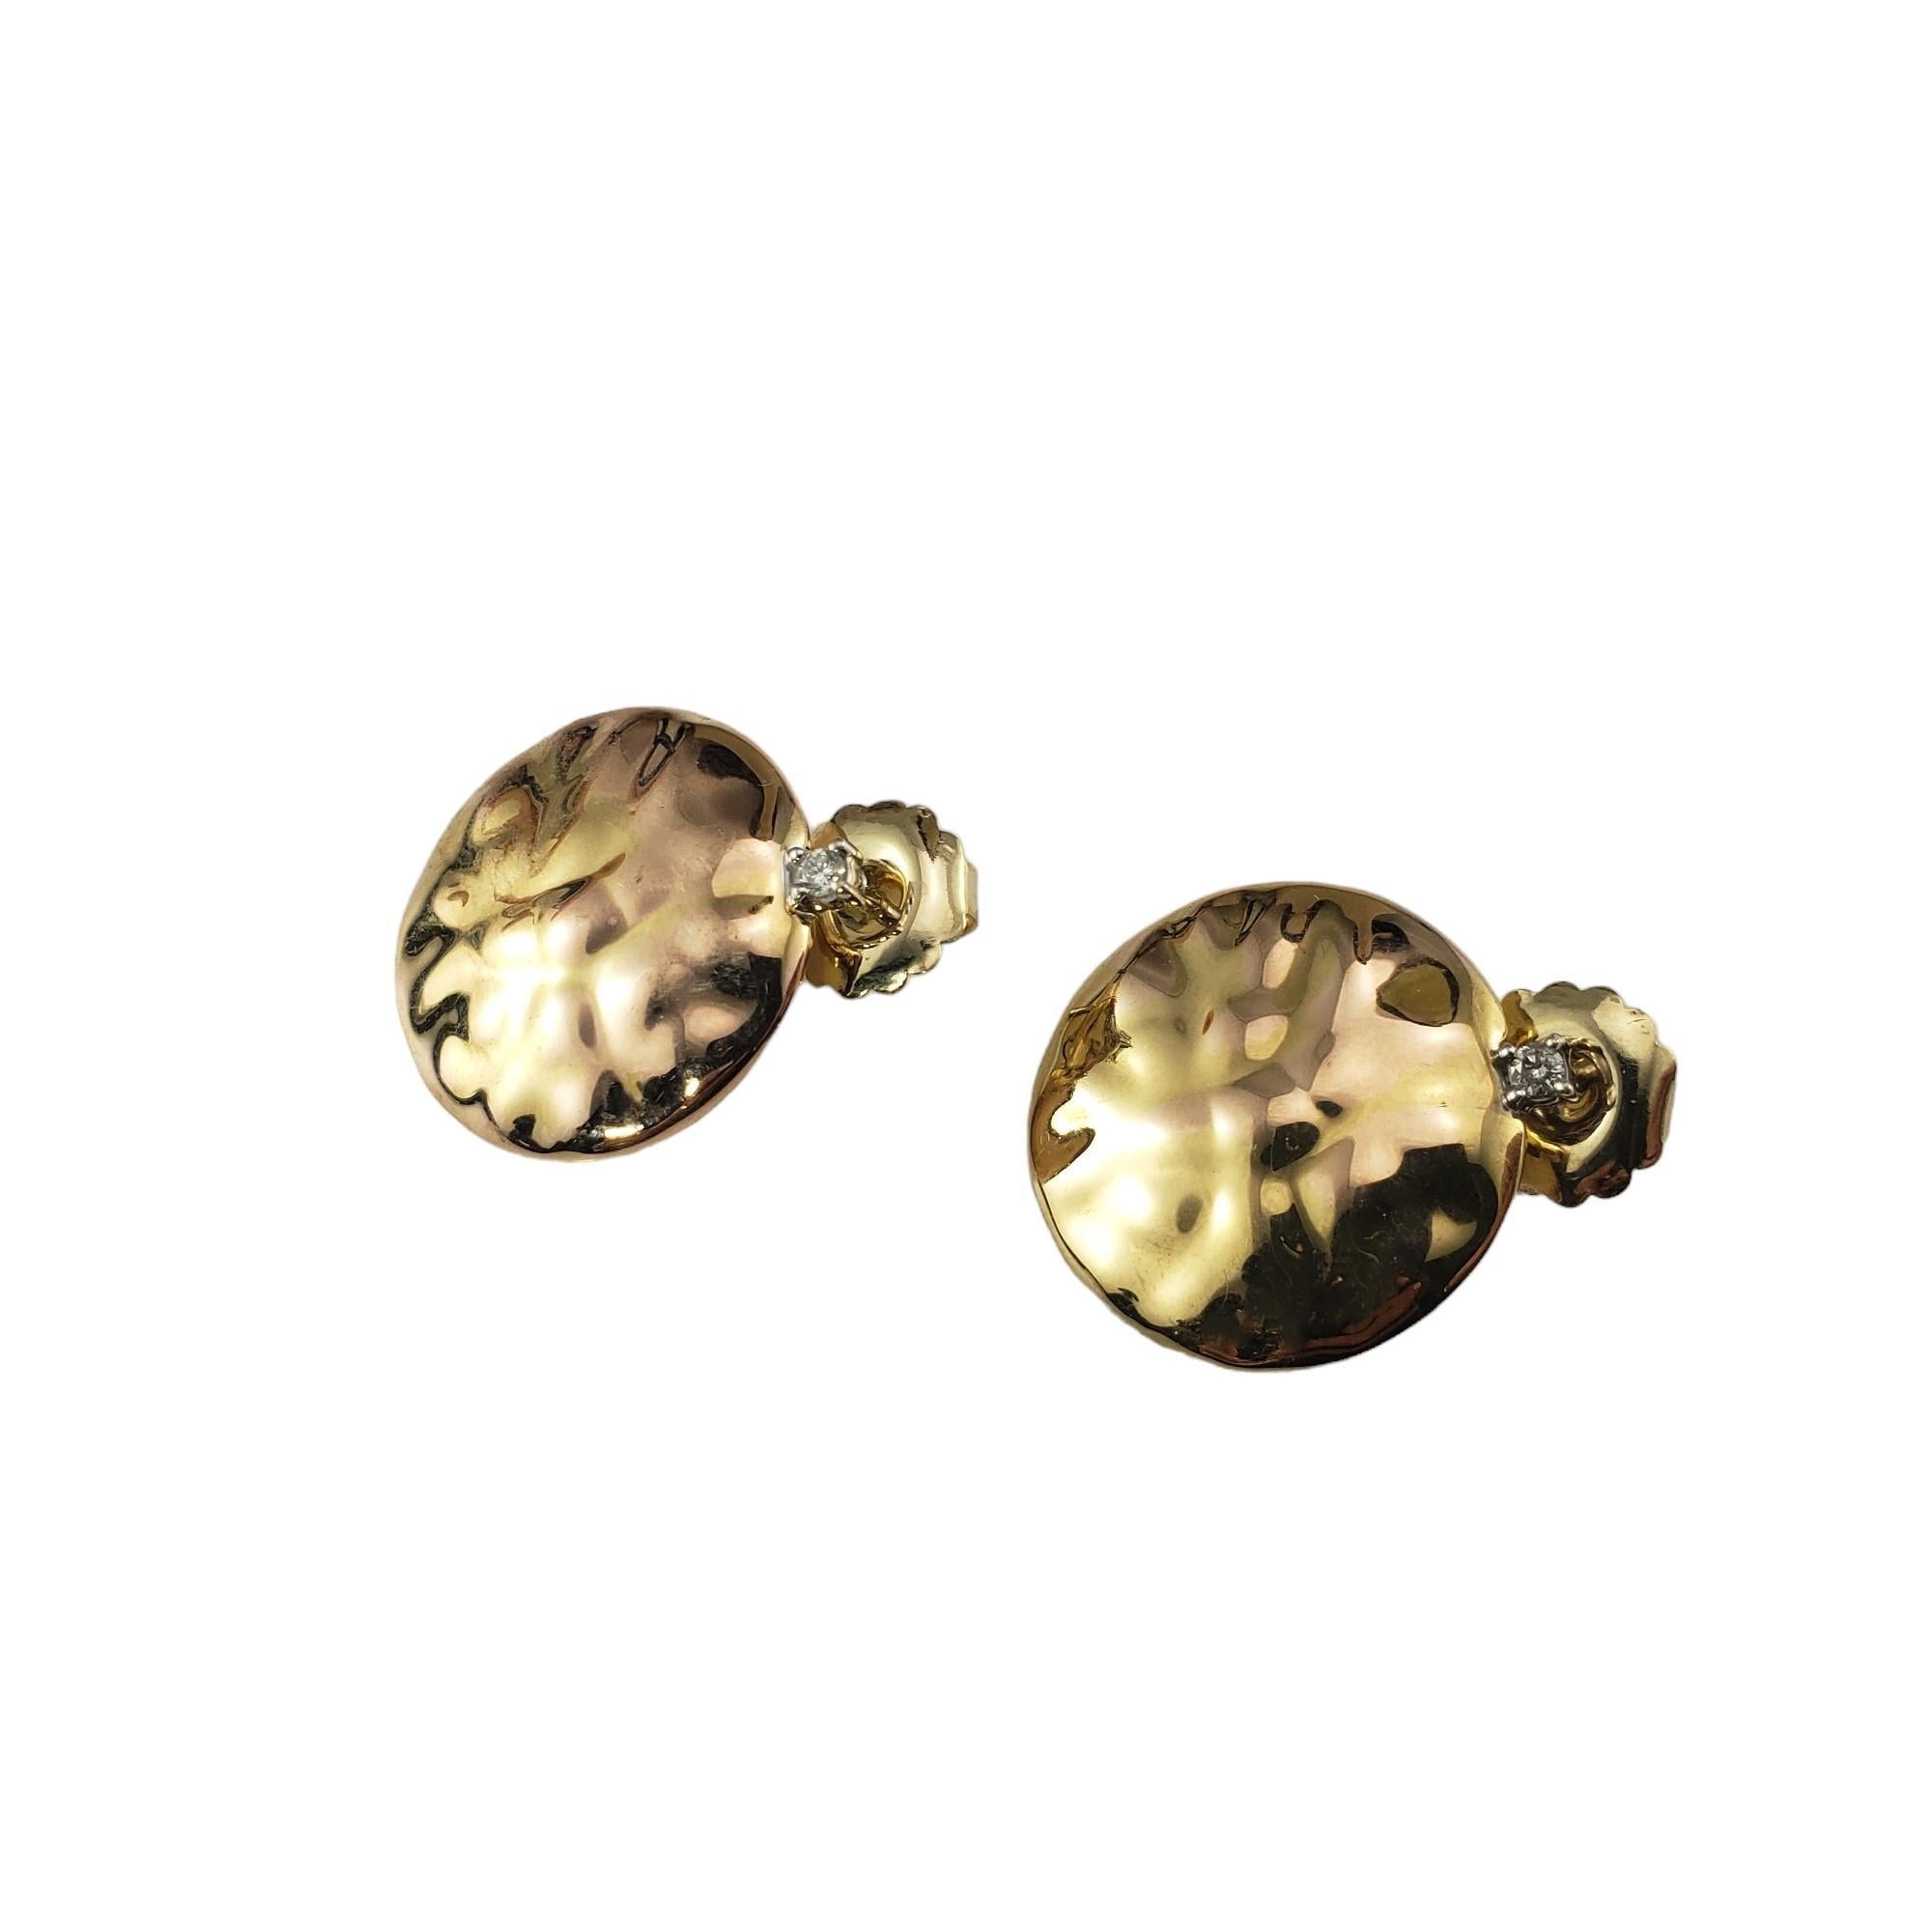 Vintage 14K Hammered Yellow Gold and Diamond Earrings-

These elegant earrings each feature one round brilliant cut diamond set in beautifully detailed hammered 14K yellow gold. Push back closures.

Approximate total diamond weight: .06 ct.

Diamond